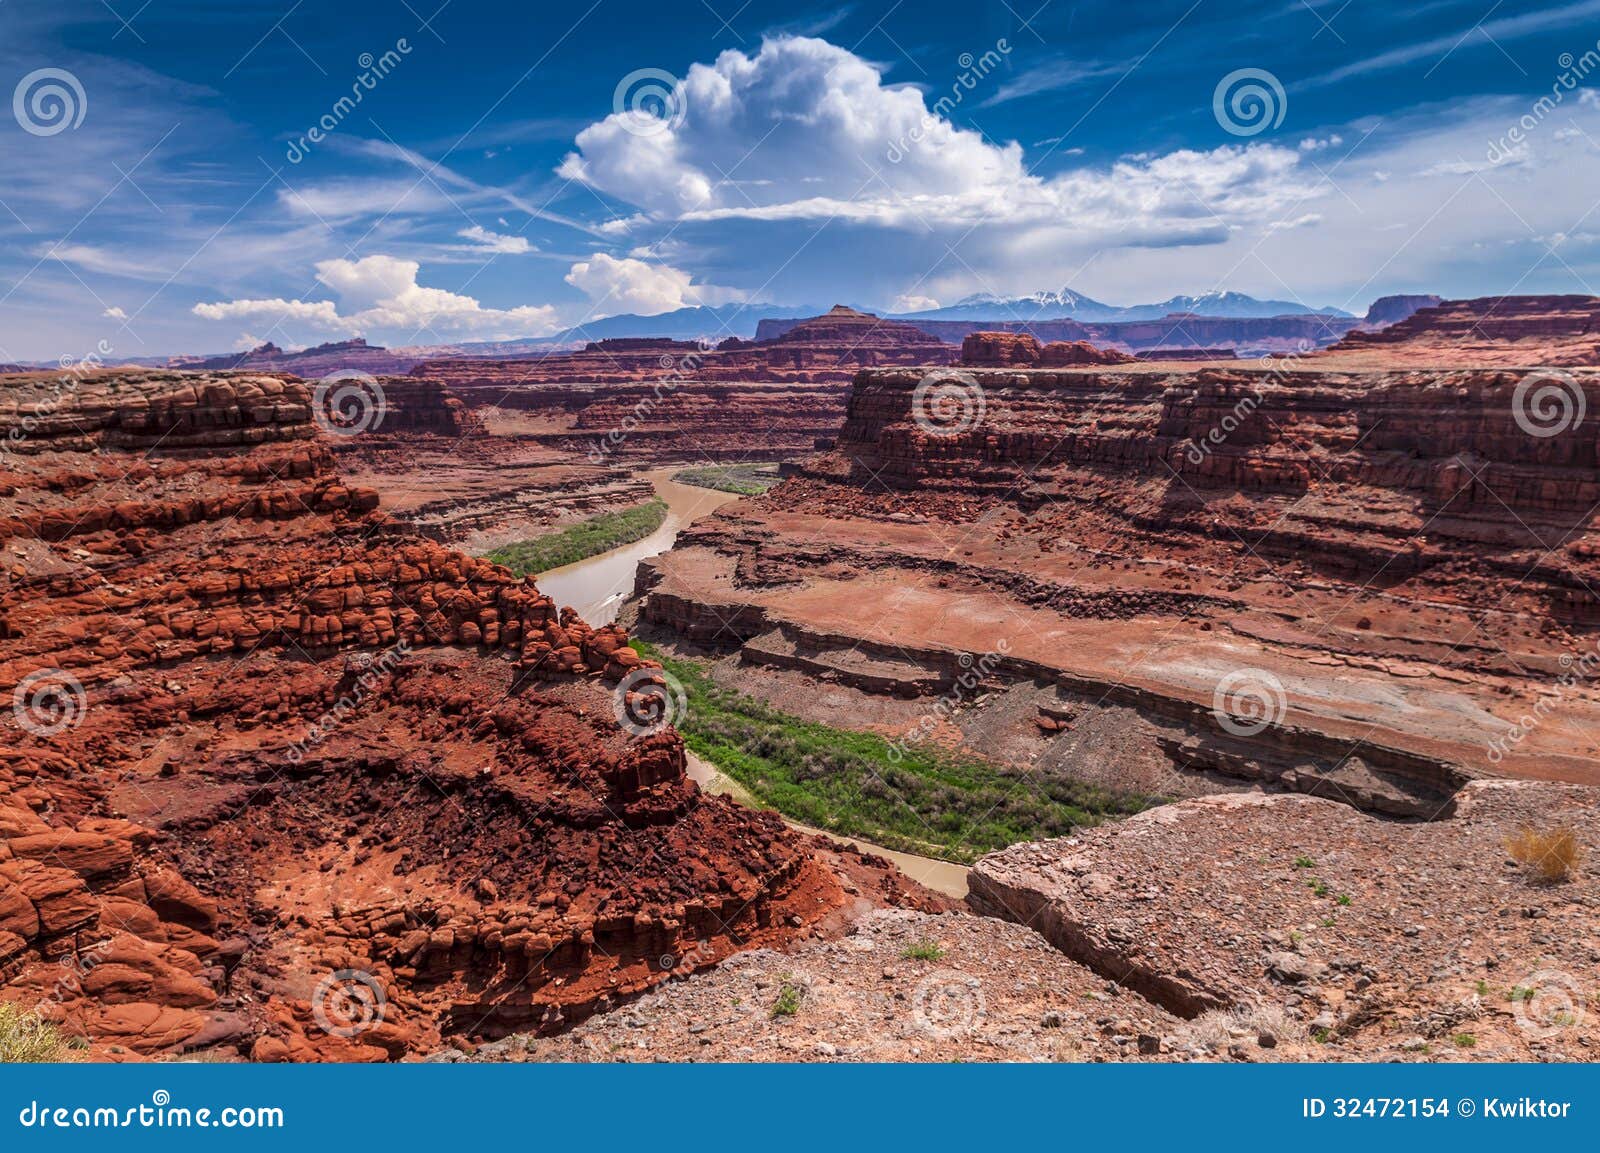 Thelma and Louise Also Known As Fossil Point. Stock Photo - Image of arid,  desert: 32472154